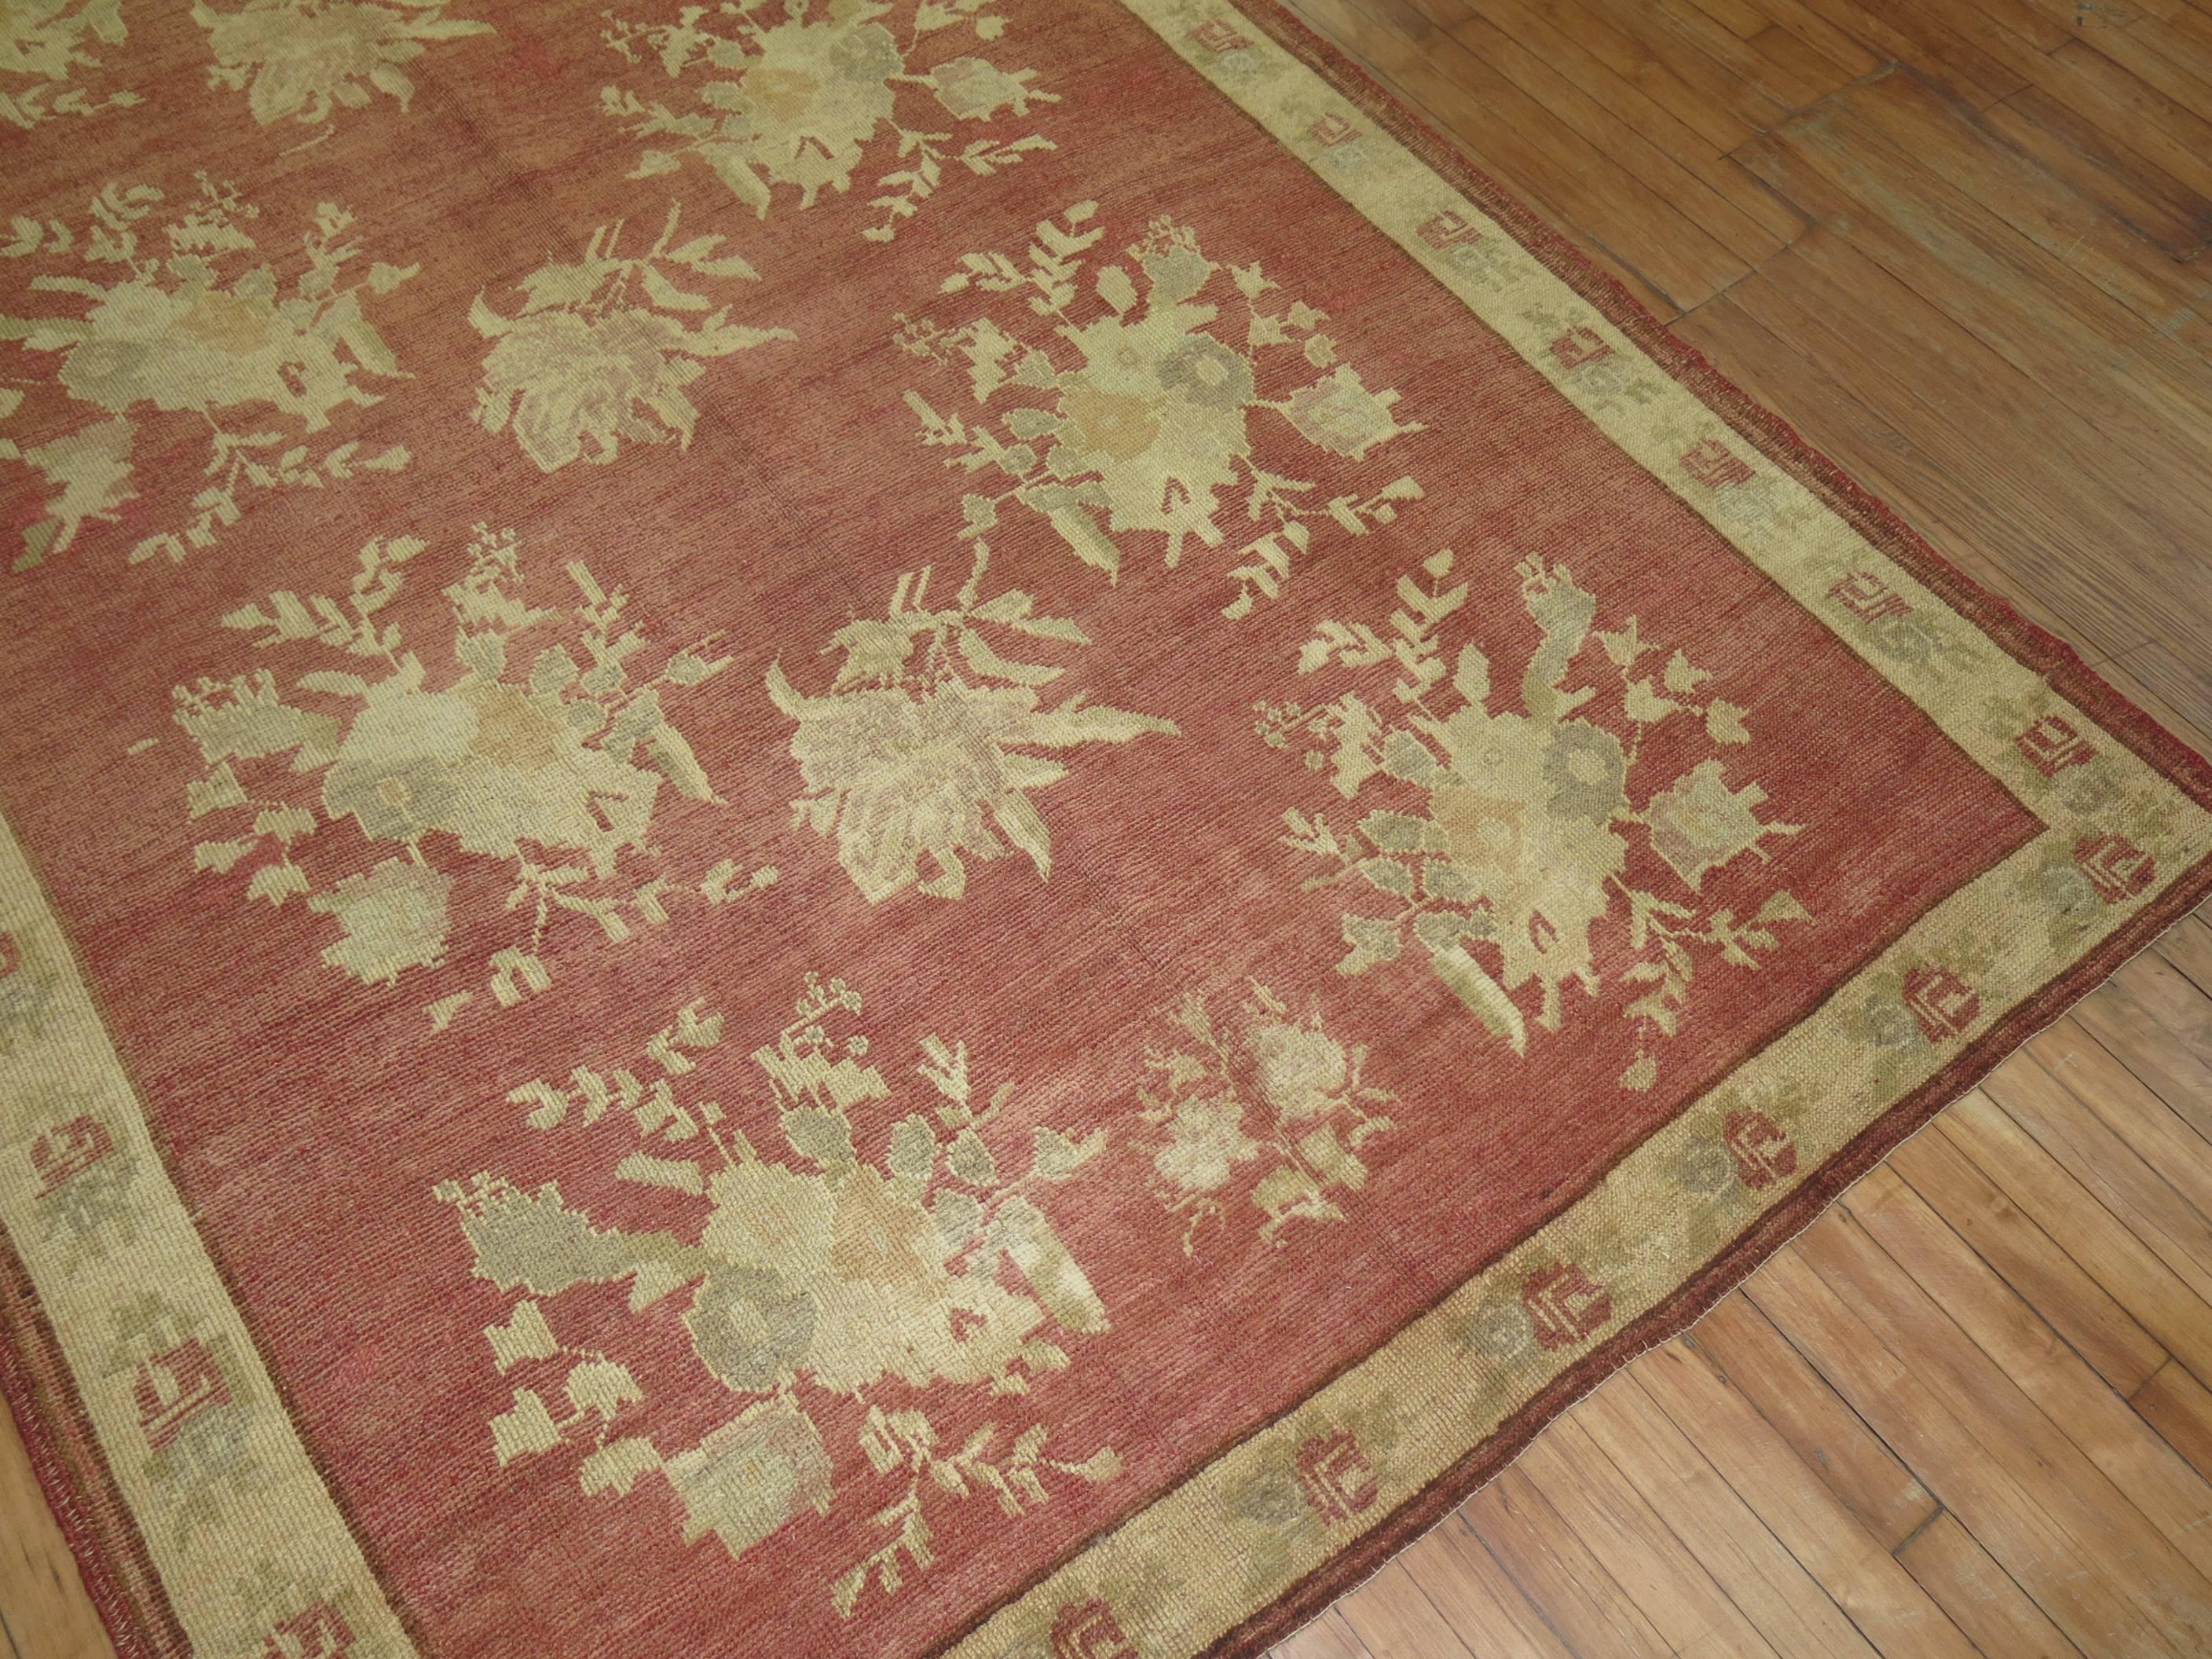 Exquisite Vintage Turkish rug with an all over floral design and border in rose and khaki.